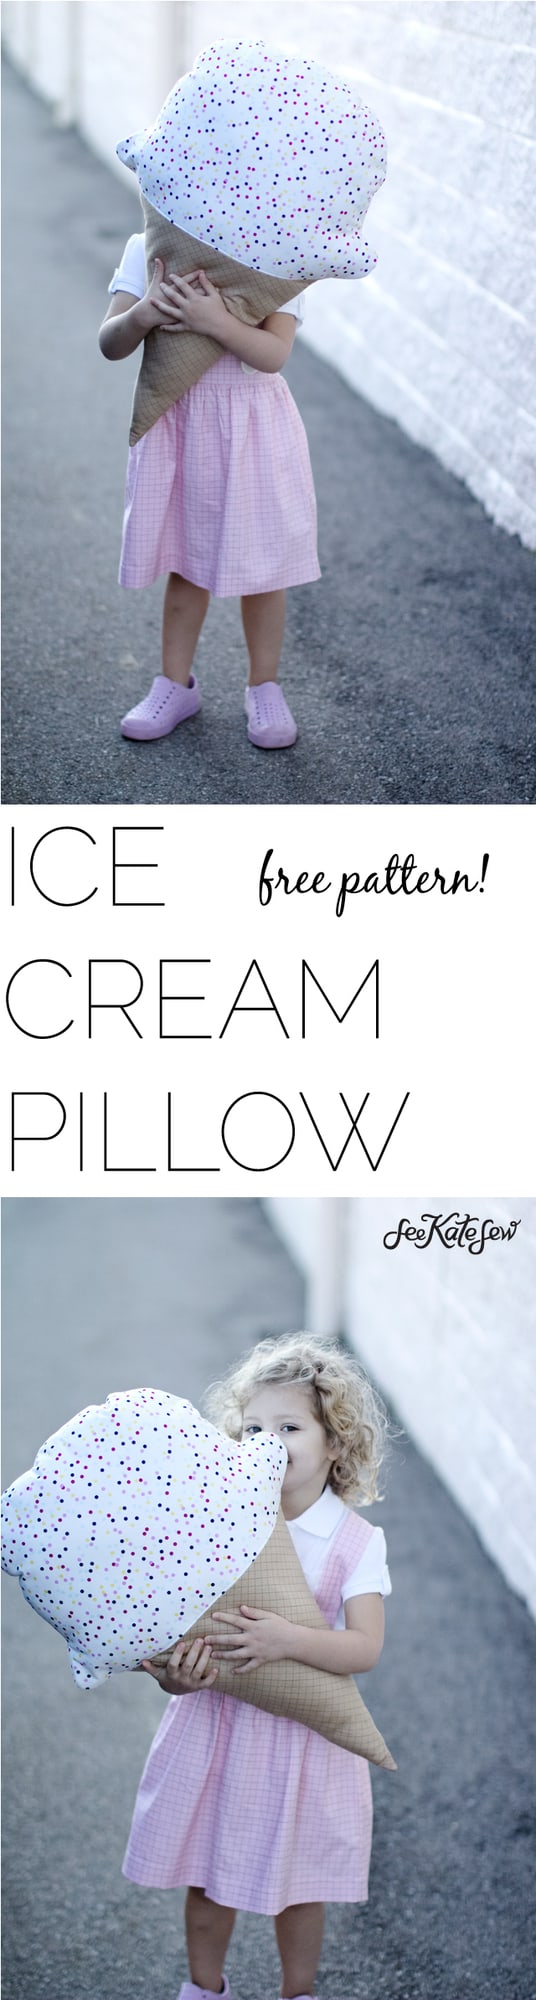 Ice Cream Pillow Project | See Kate Sew